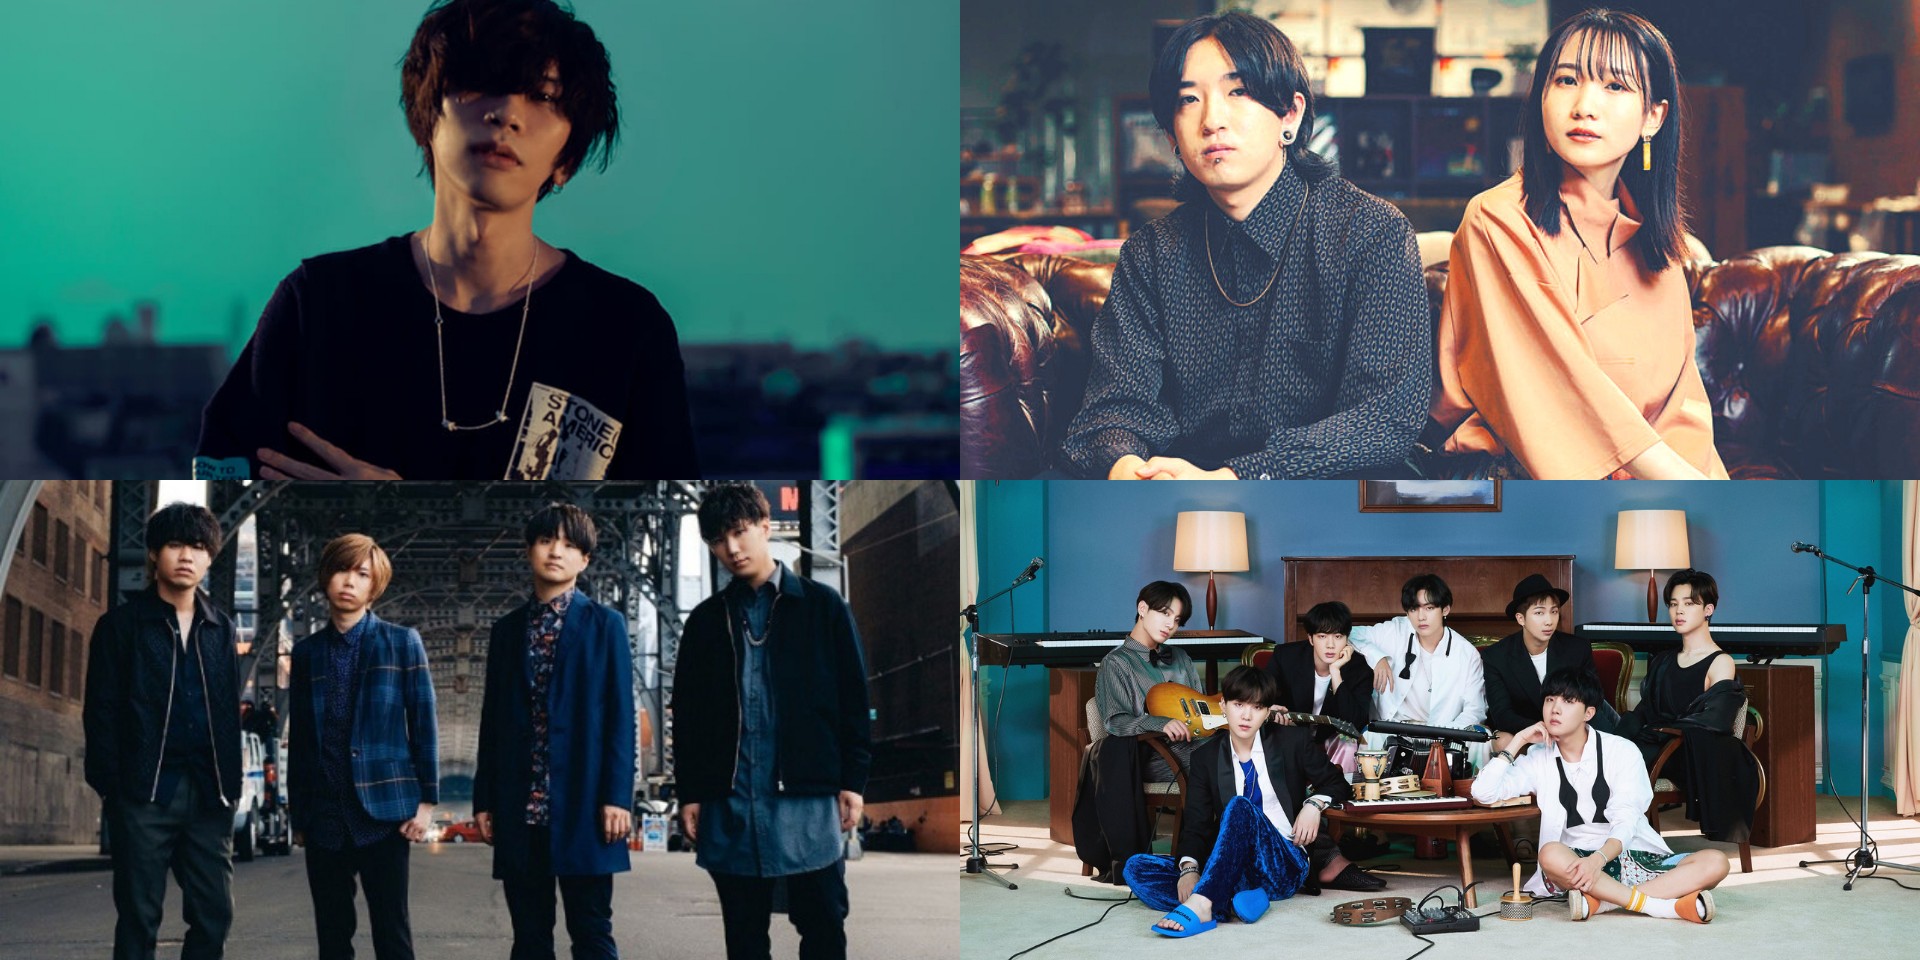 Official Hige Dandism, YOASOBI, Kenshi Yonezu, BTS, and more win at the 2021 SPACE SHOWER MUSIC AWARDS